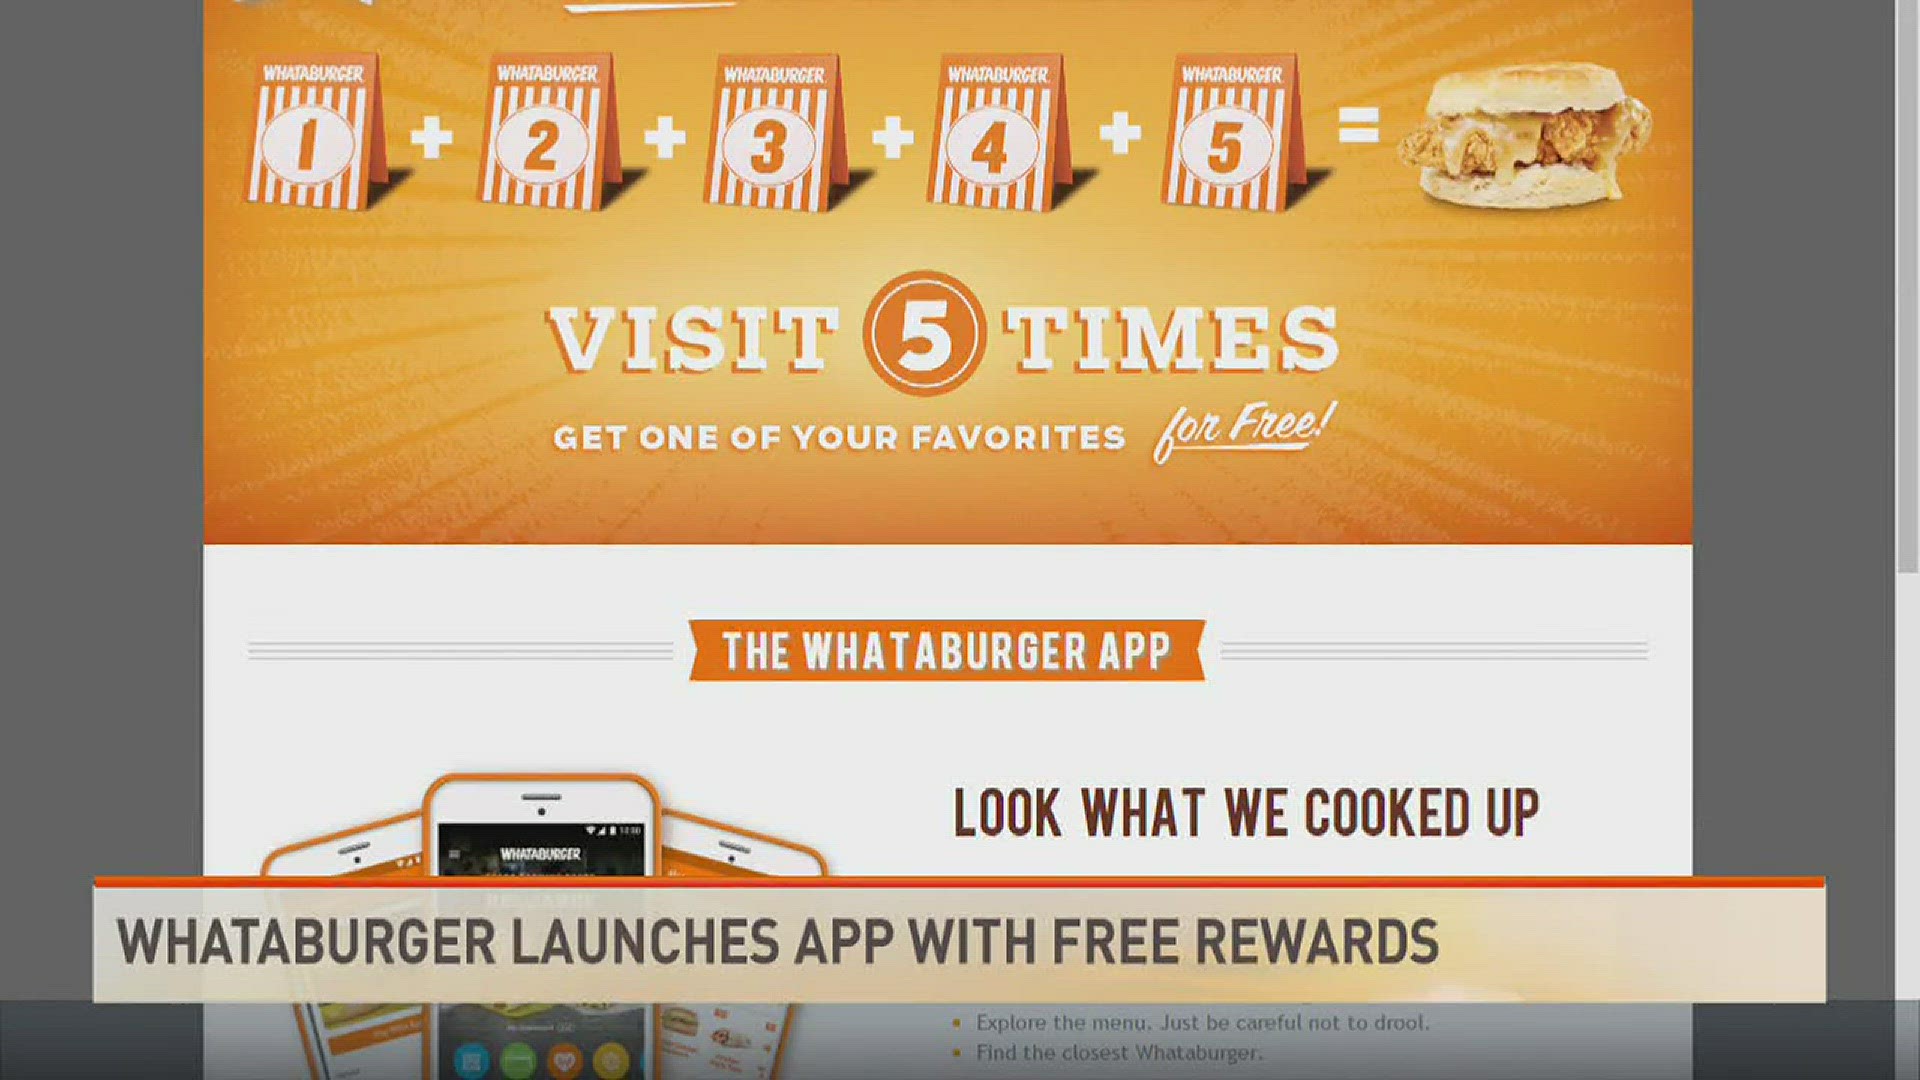 Whataburger launches new app, which rewards loyal customers.